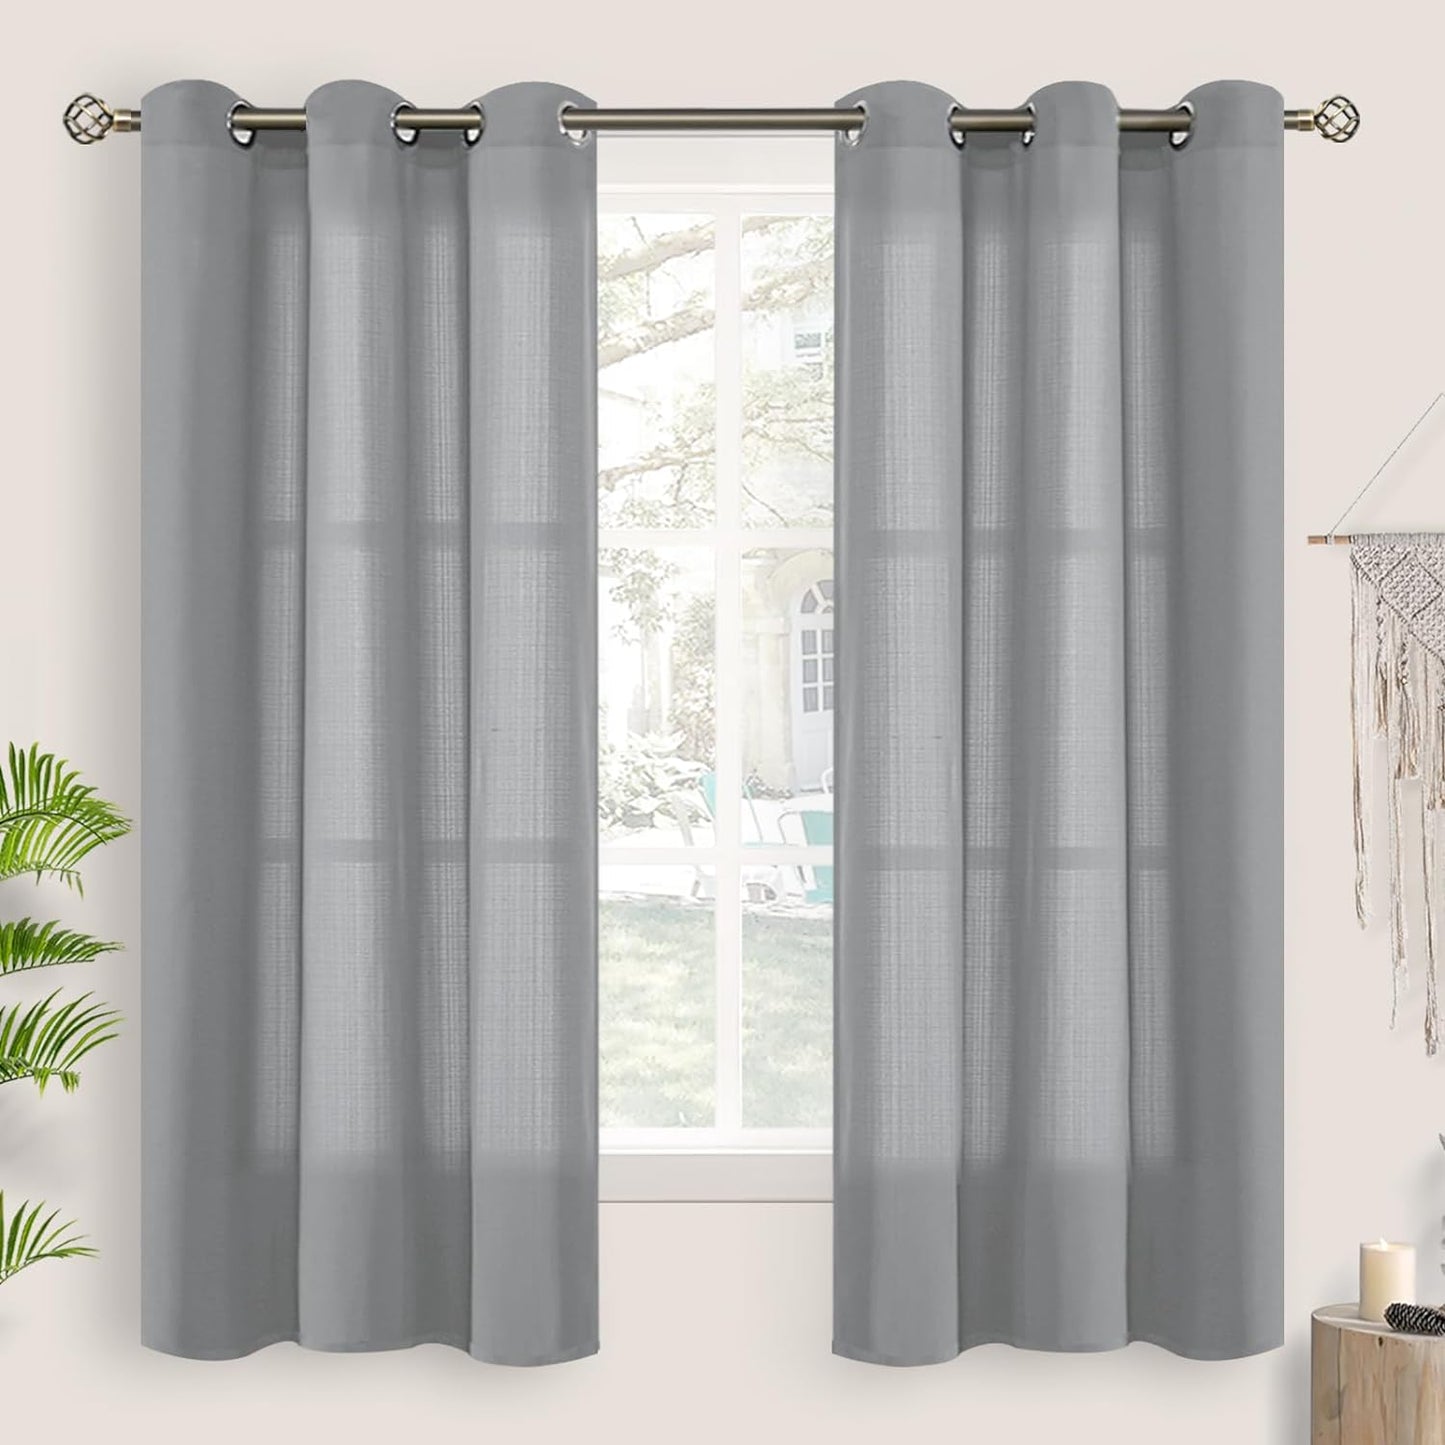 Bgment Natural Linen Look Semi Sheer Curtains for Bedroom, 52 X 54 Inch White Grommet Light Filtering Casual Textured Privacy Curtains for Bay Window, 2 Panels  BGment Grey 42W X 63L 